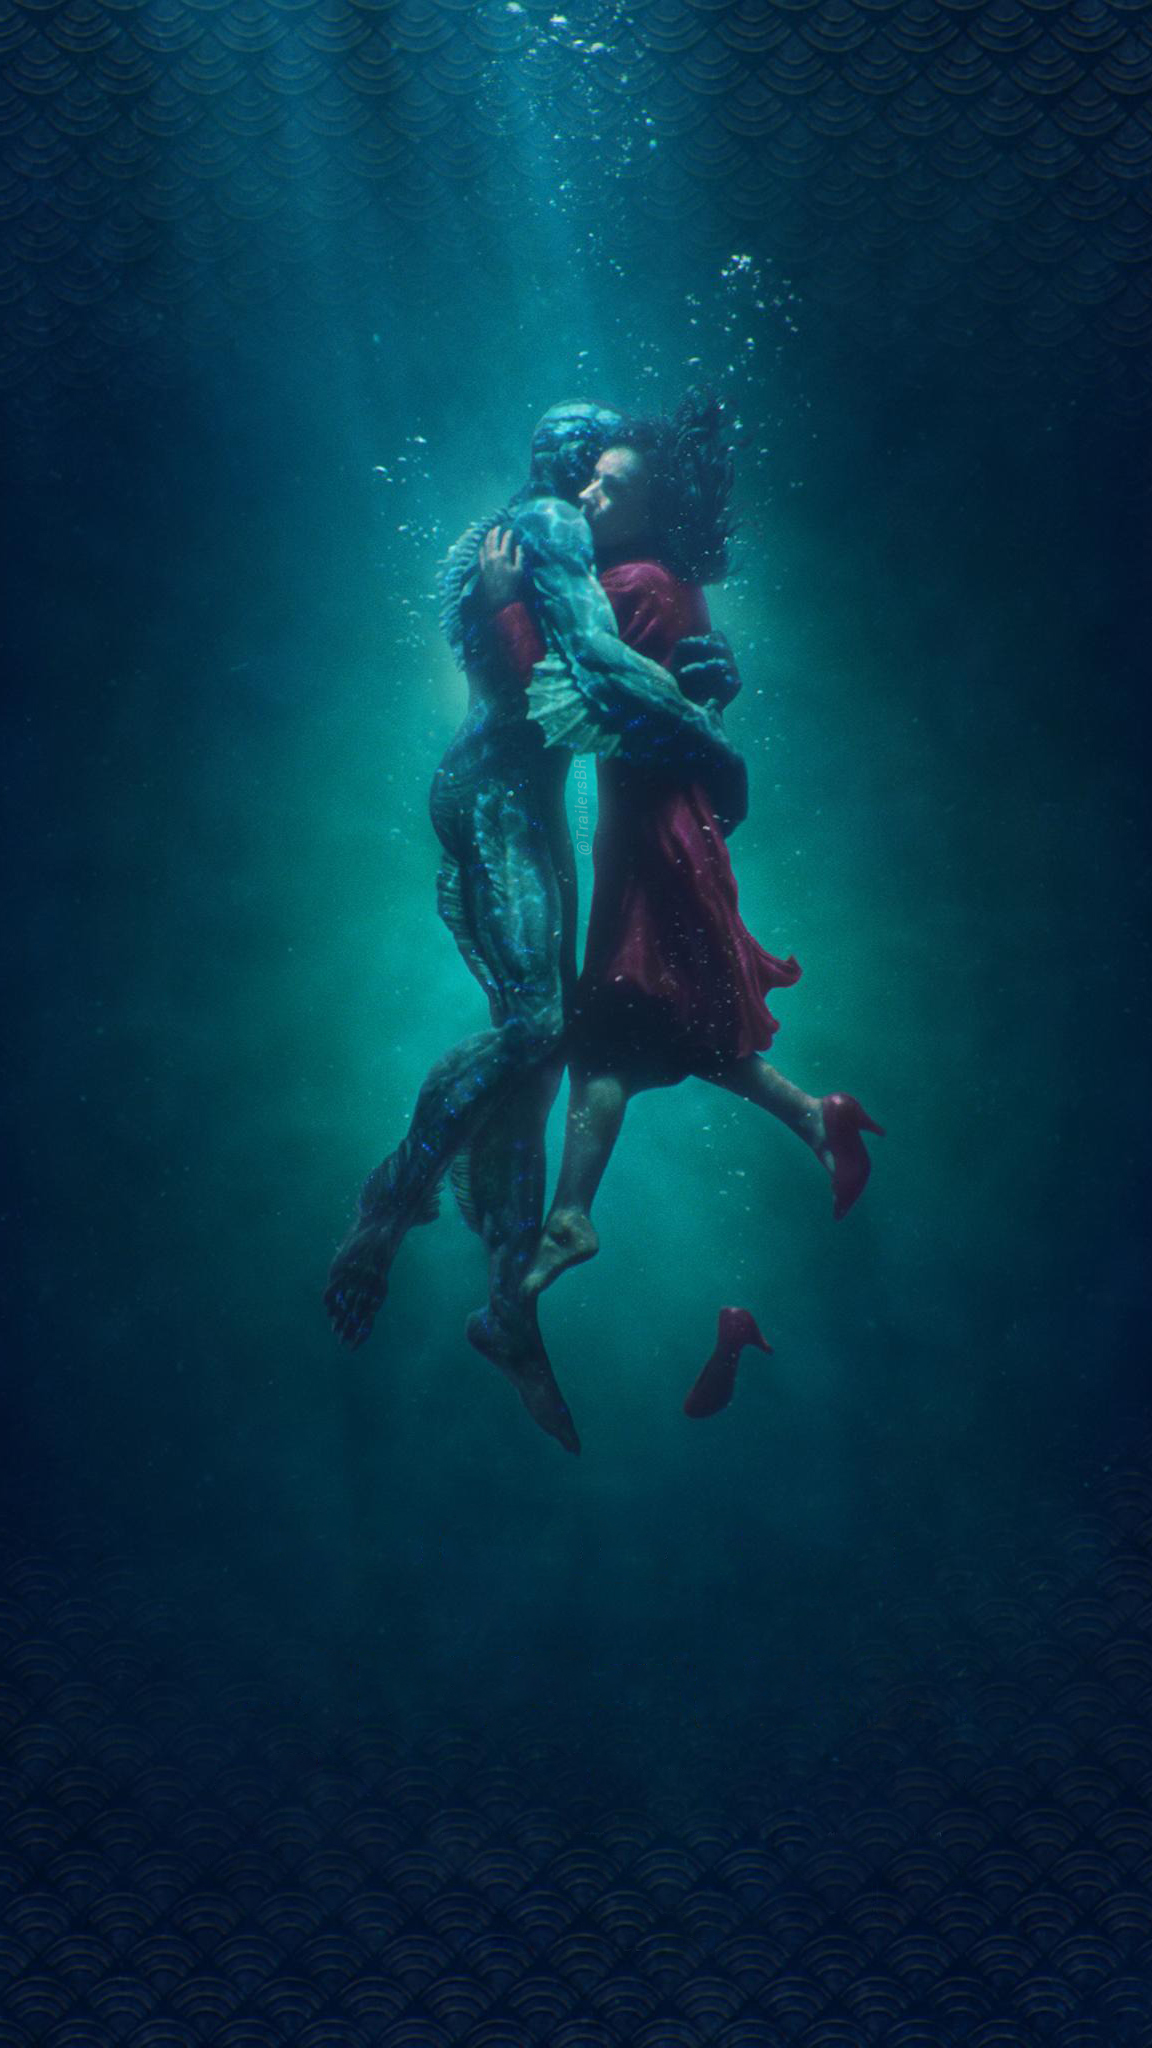 Wallpaper Shape of Water Film, Fantasy, Film Poster, Film Director, Water, Background Free Image